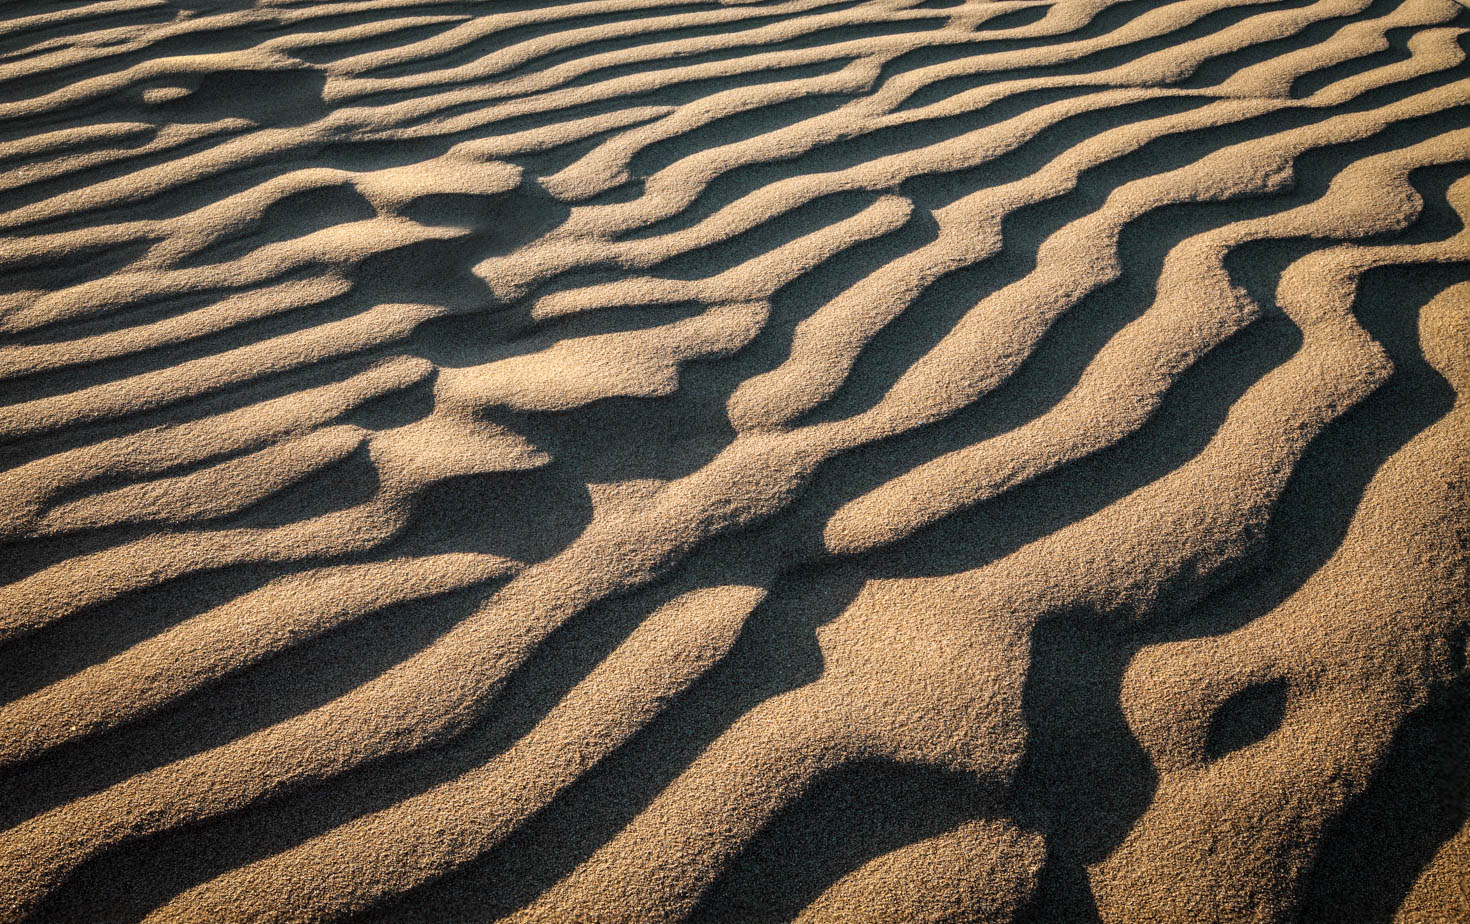 Sand Dunes, Pismo Beach State Park, California #vezzaniphotography